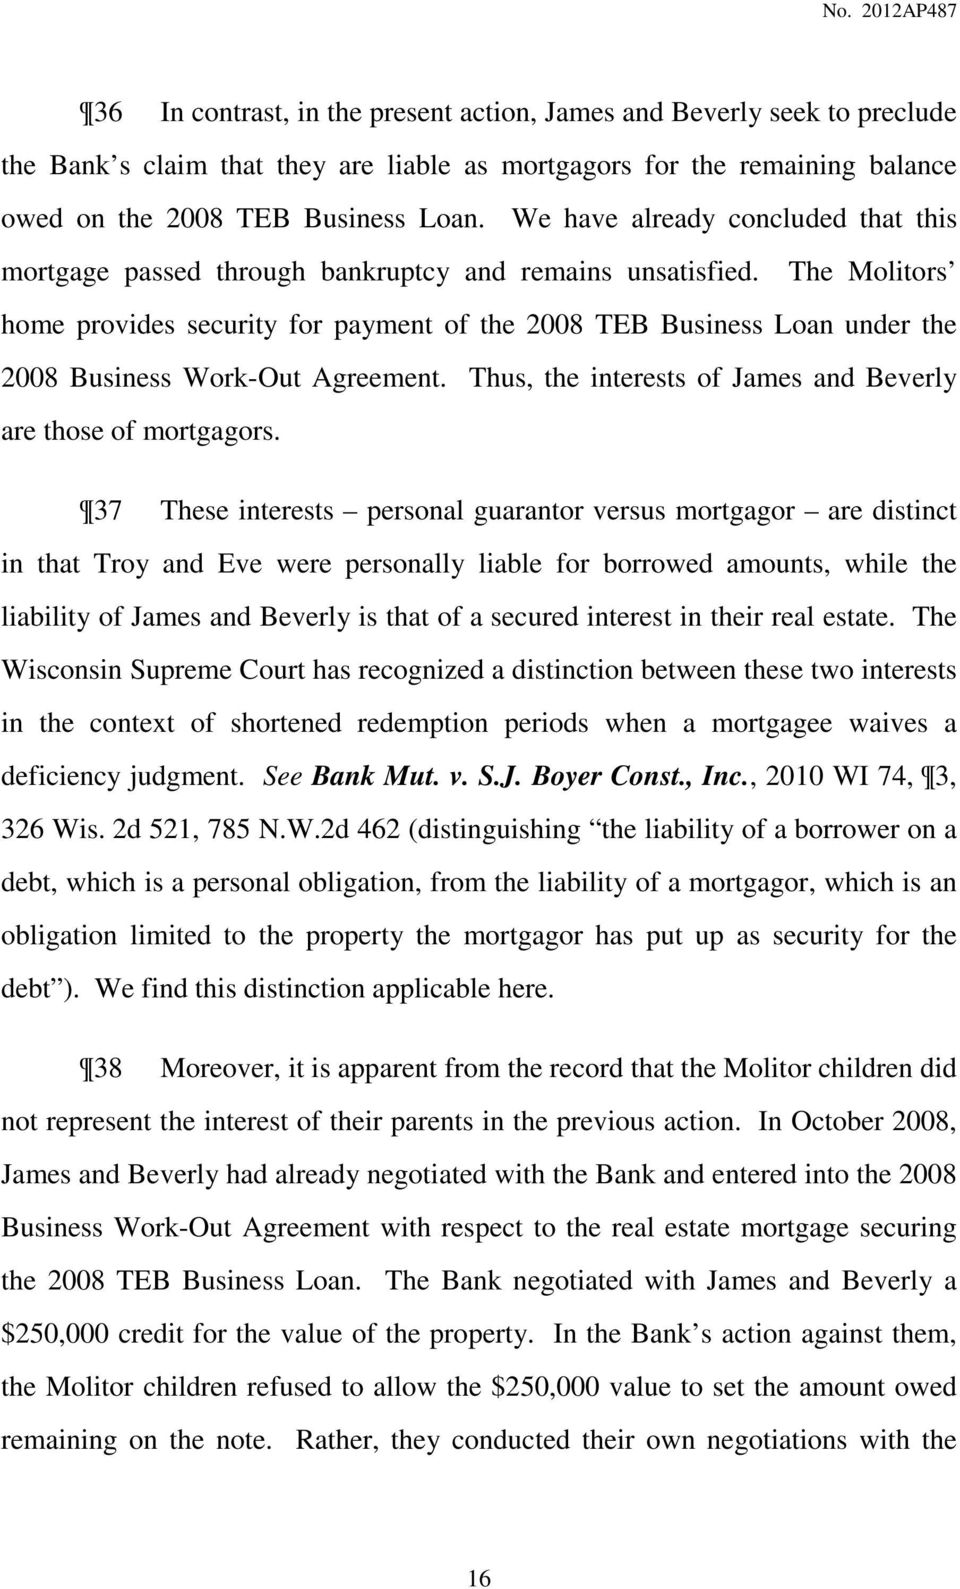 The Molitors home provides security for payment of the 2008 TEB Business Loan under the 2008 Business Work-Out Agreement. Thus, the interests of James and Beverly are those of mortgagors.